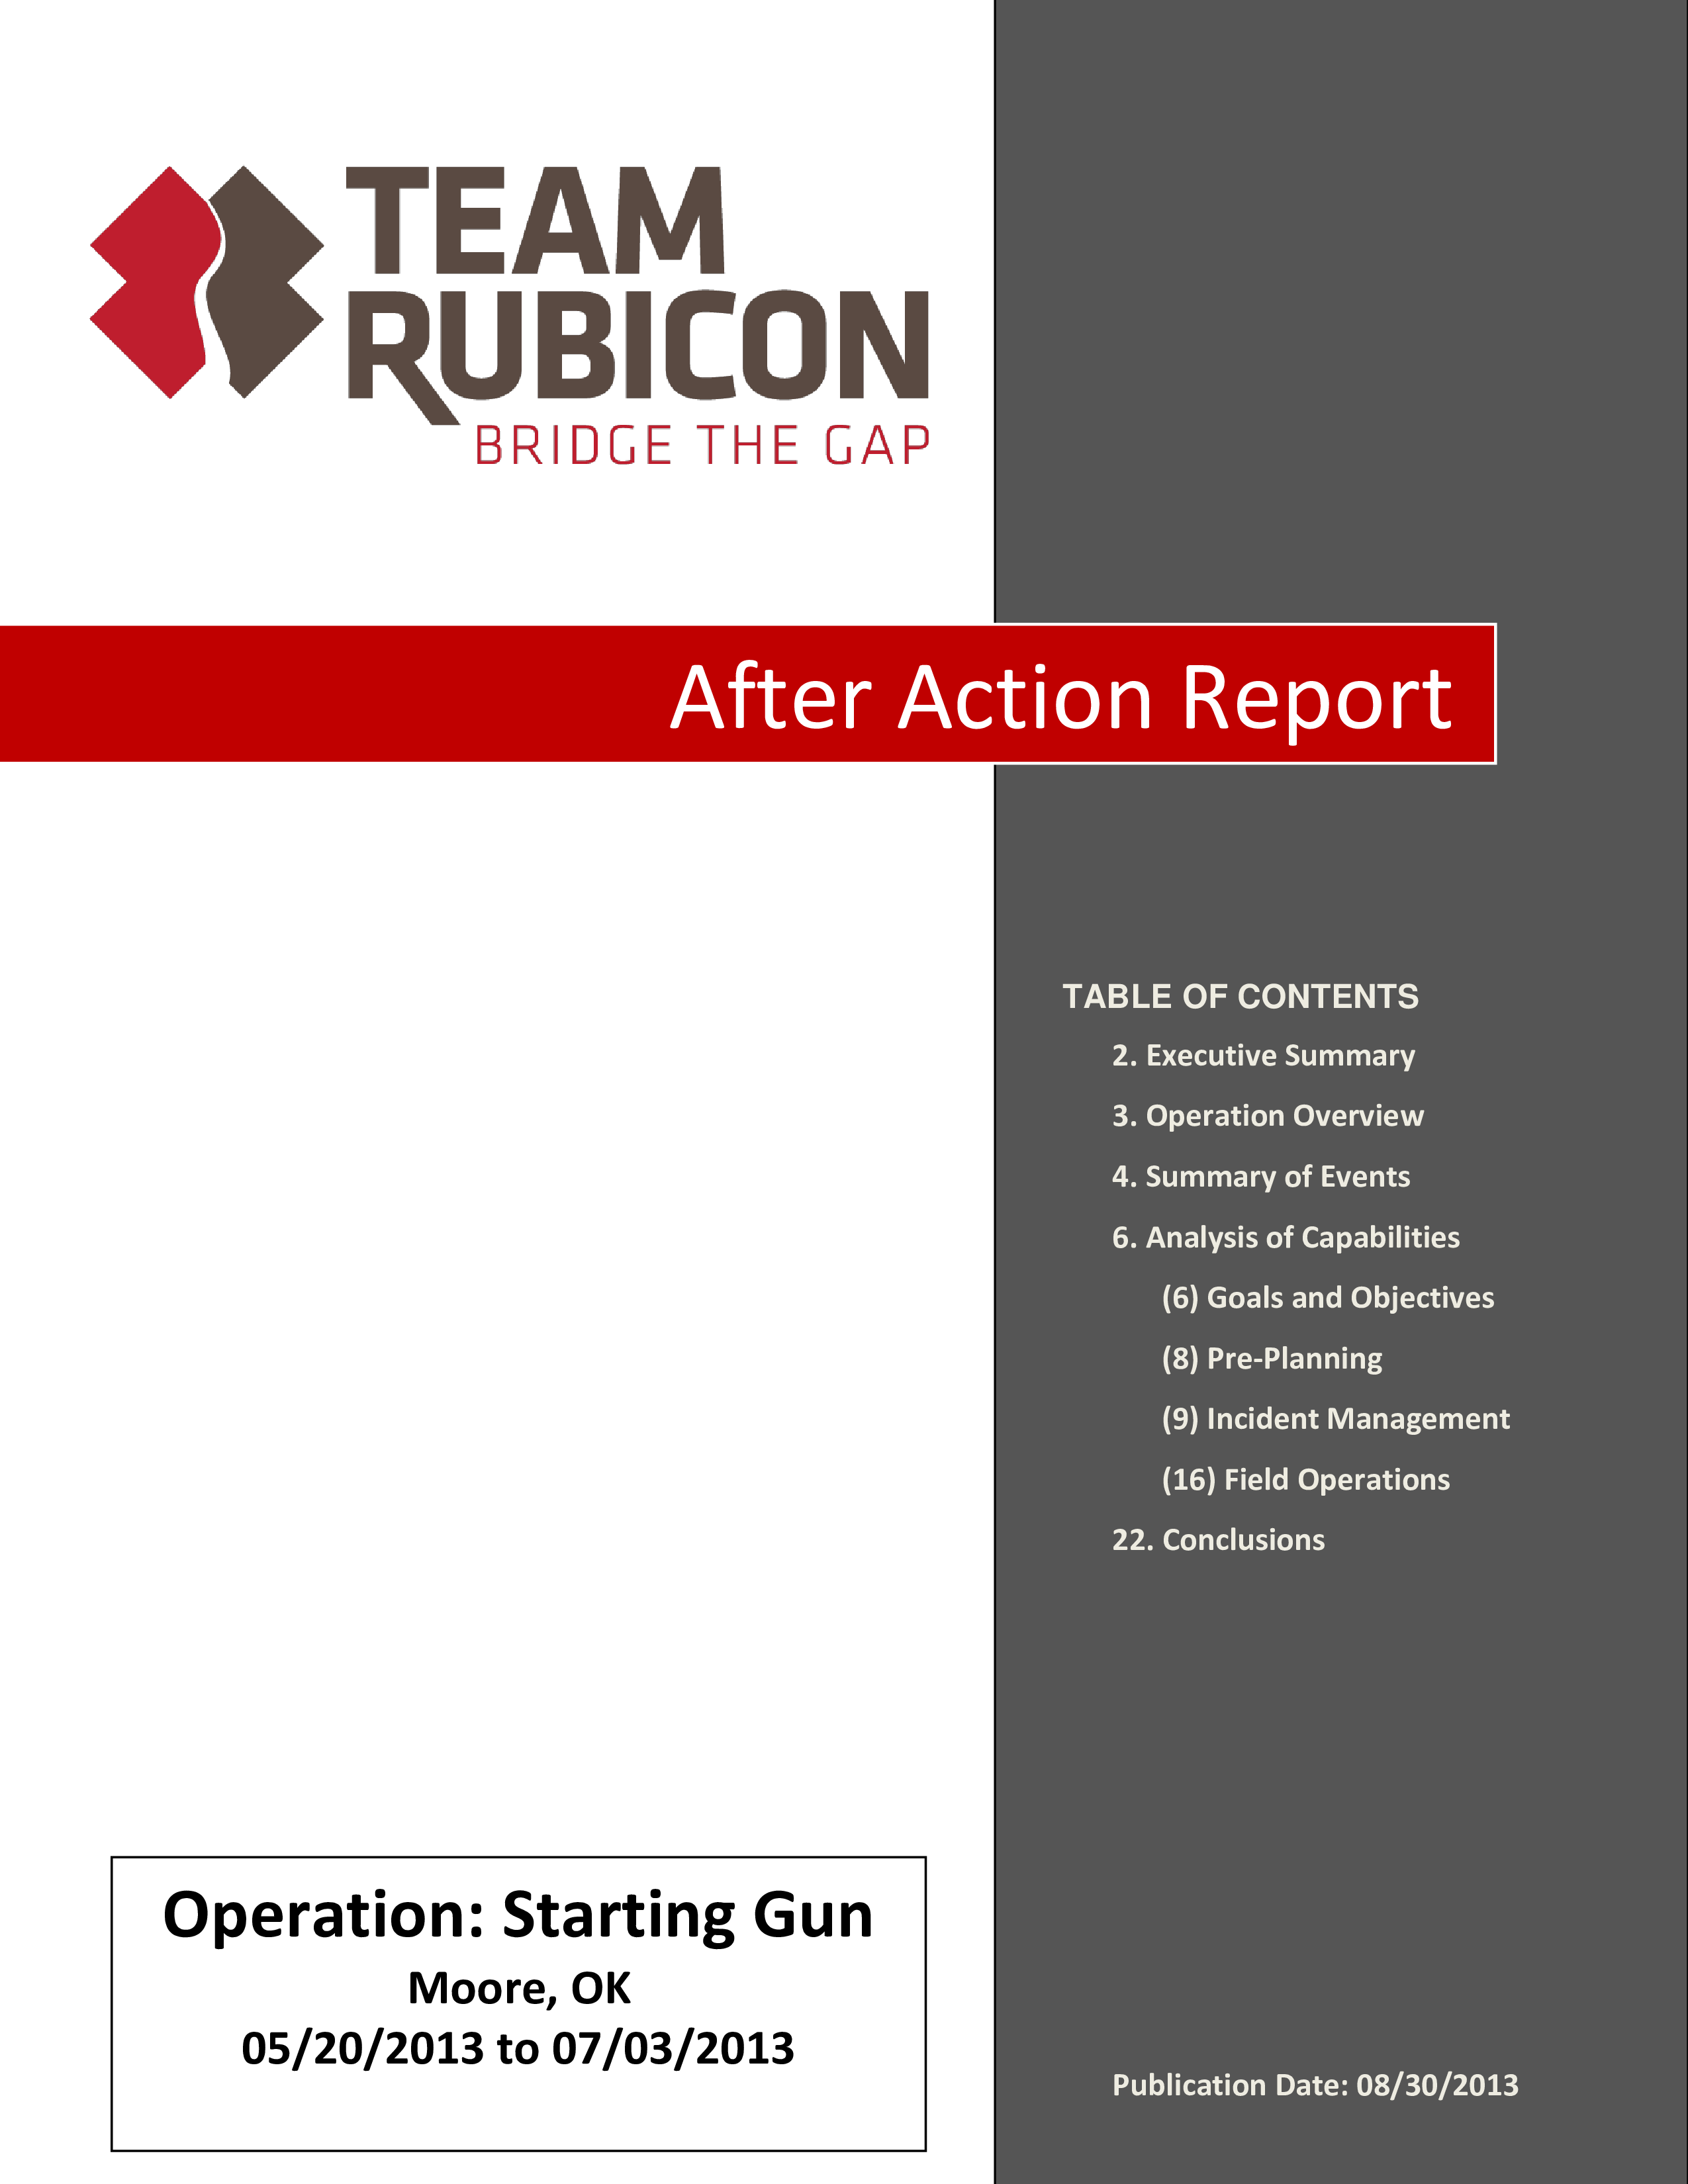 Action Report main image